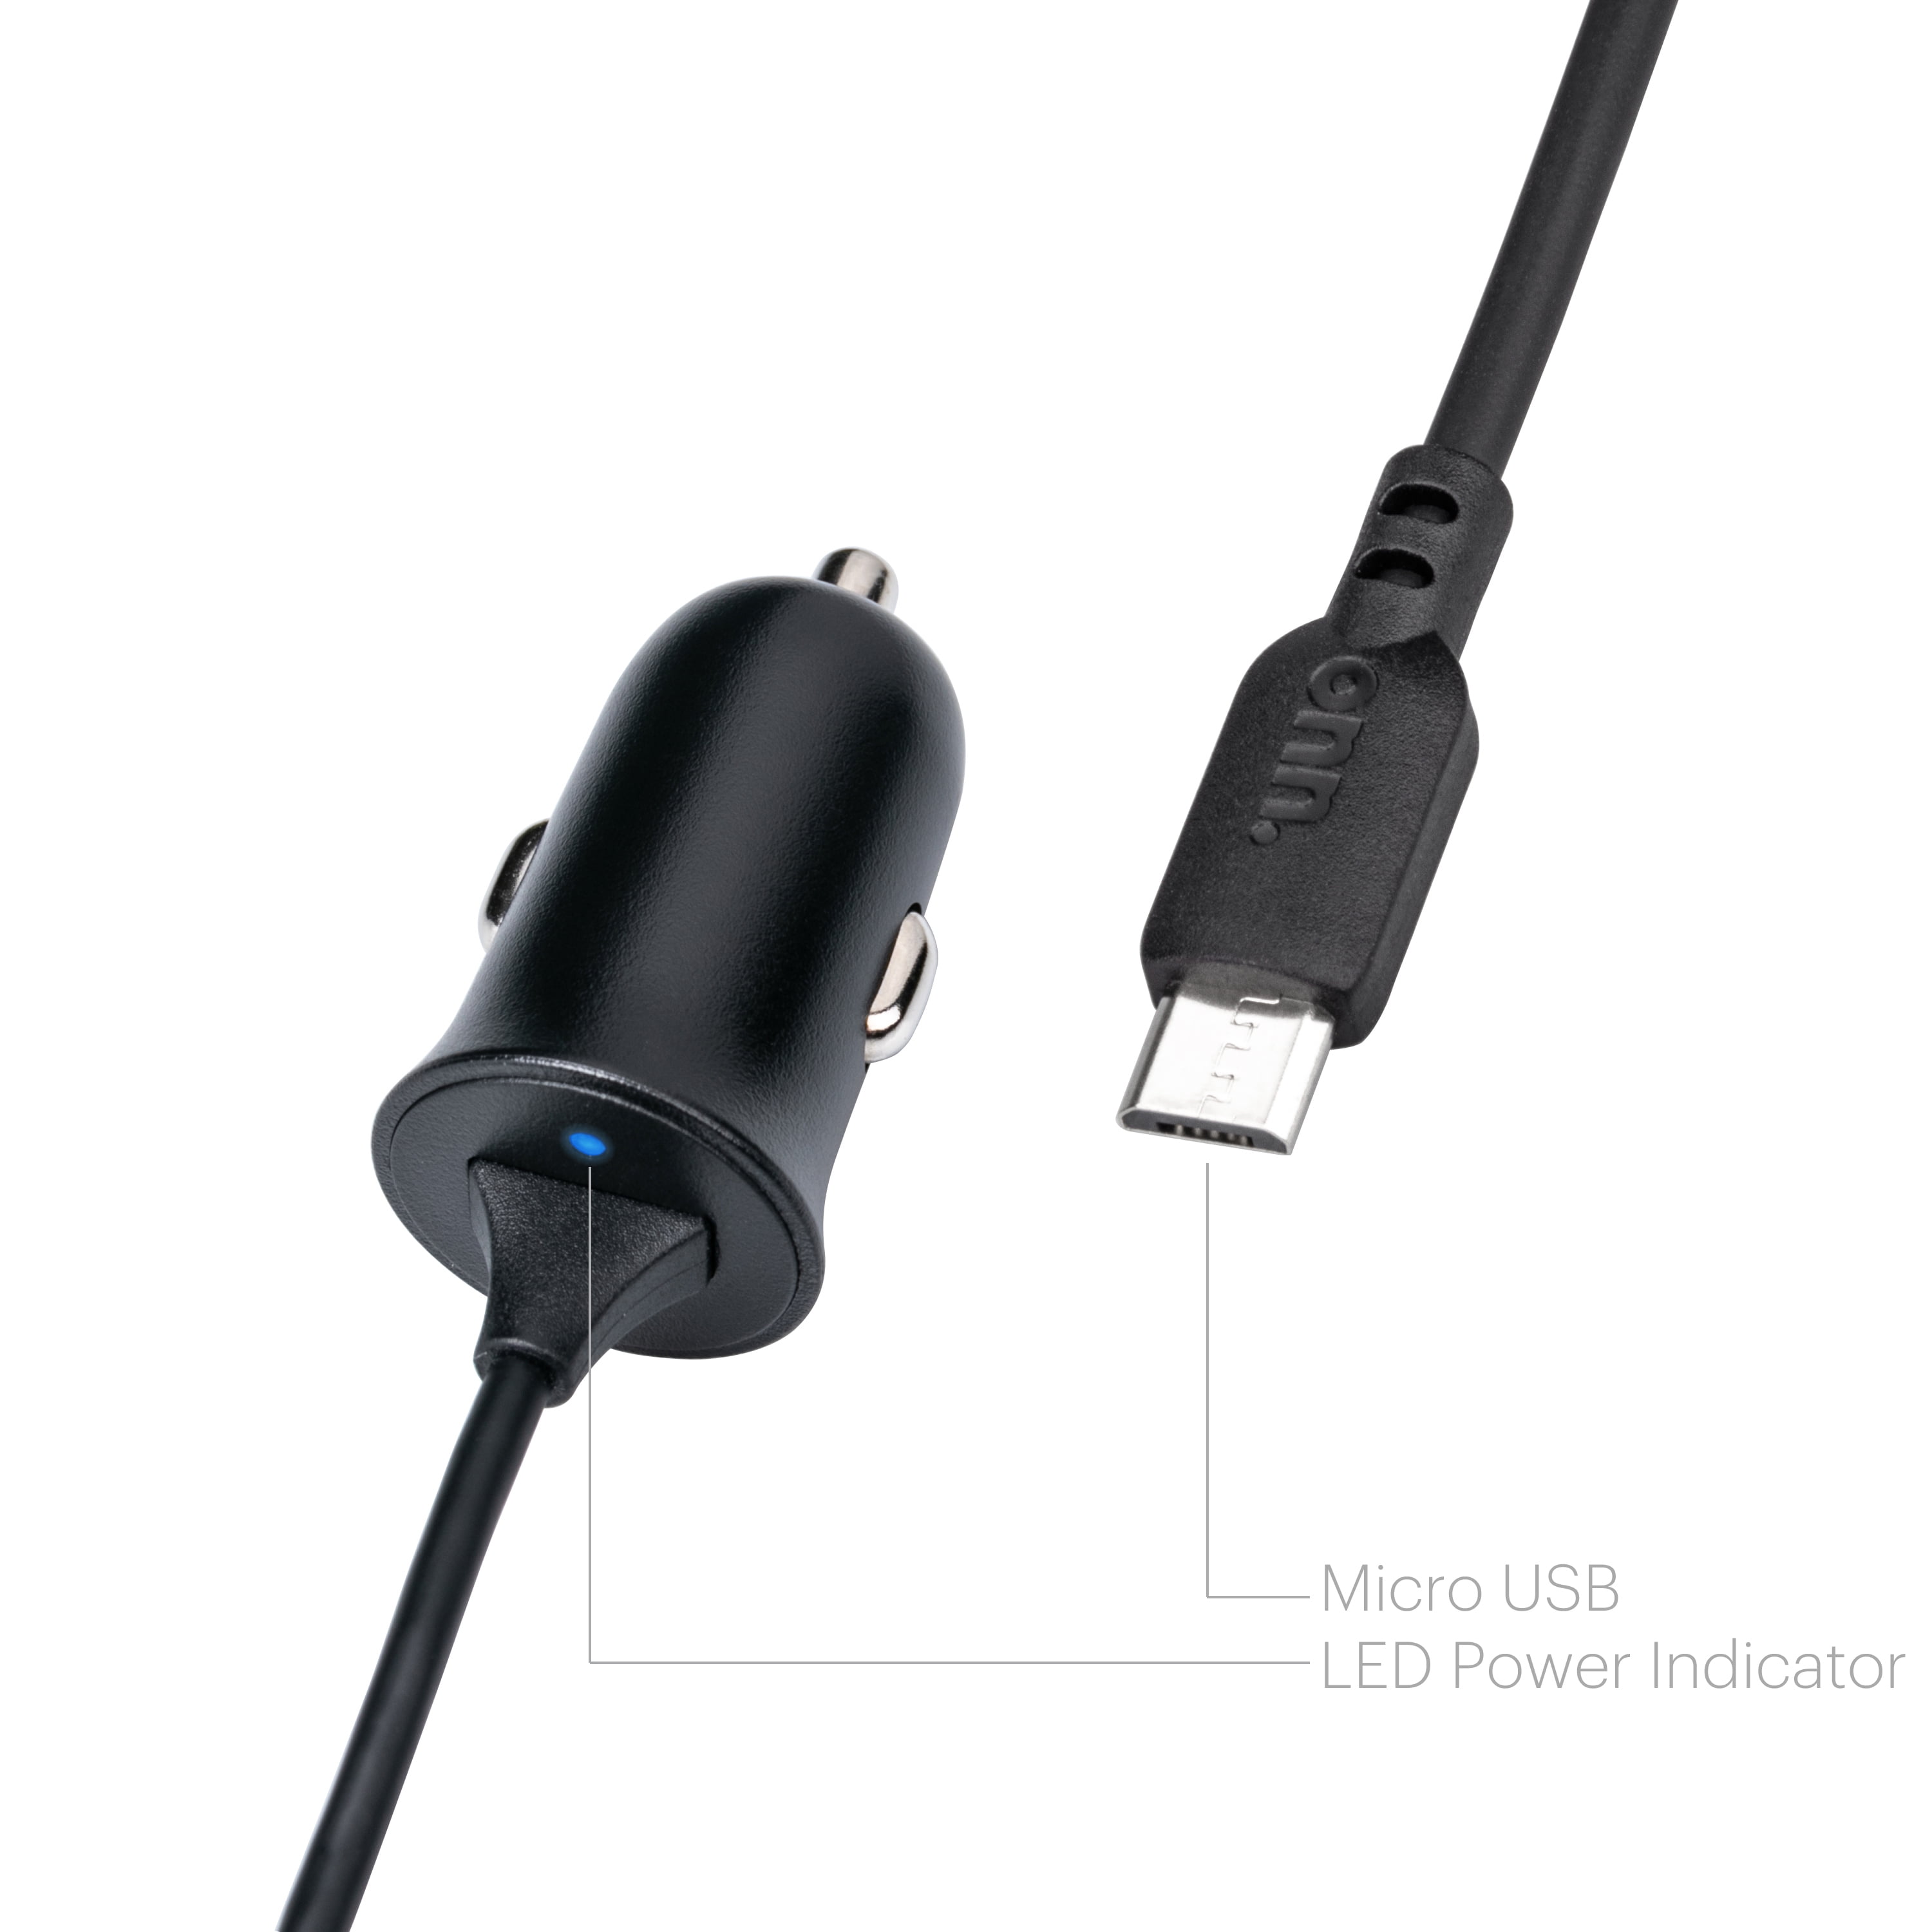 Onn. 2.4a Car Charger Built-In Micro-USB Cable, Compatible with Mobile Devices with A Micro USB Port